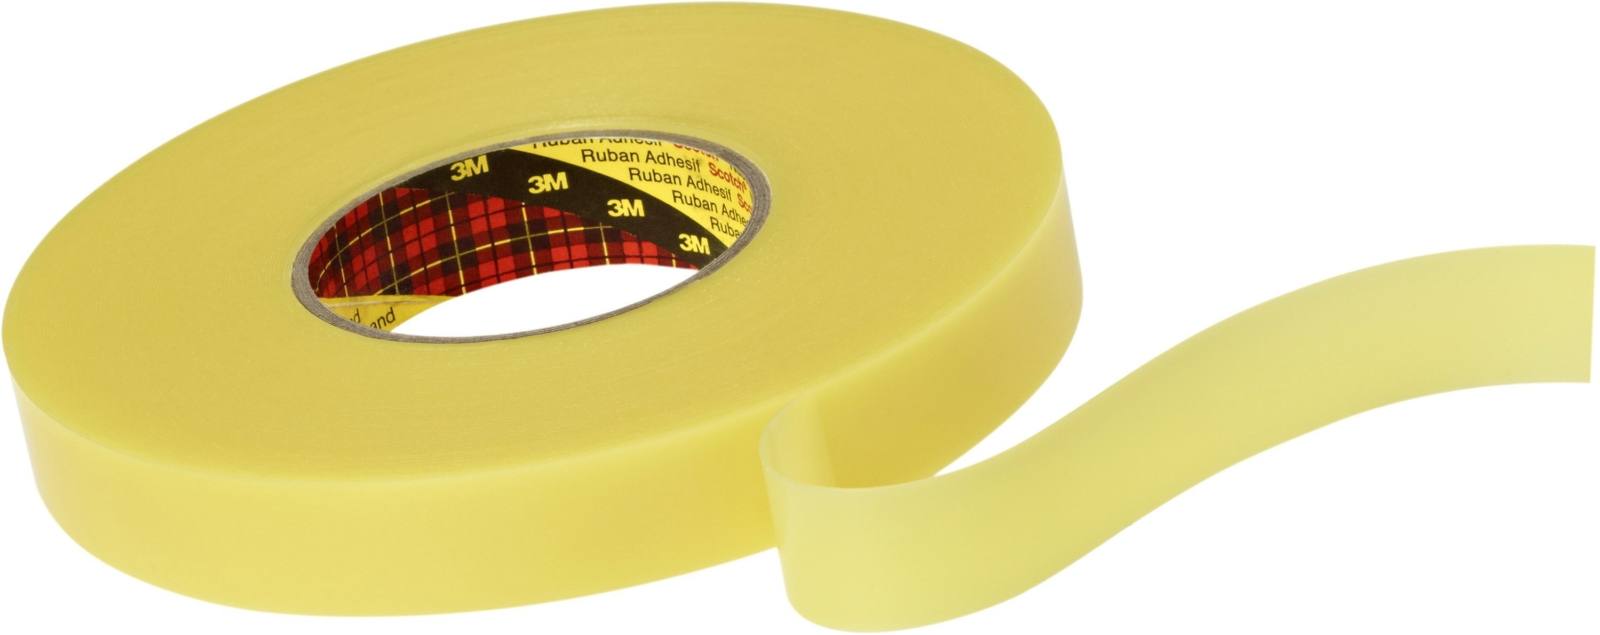 3M Double-sided removable adhesive tape 4656F, yellow, 9 mm x 33 m, 0.6 mm